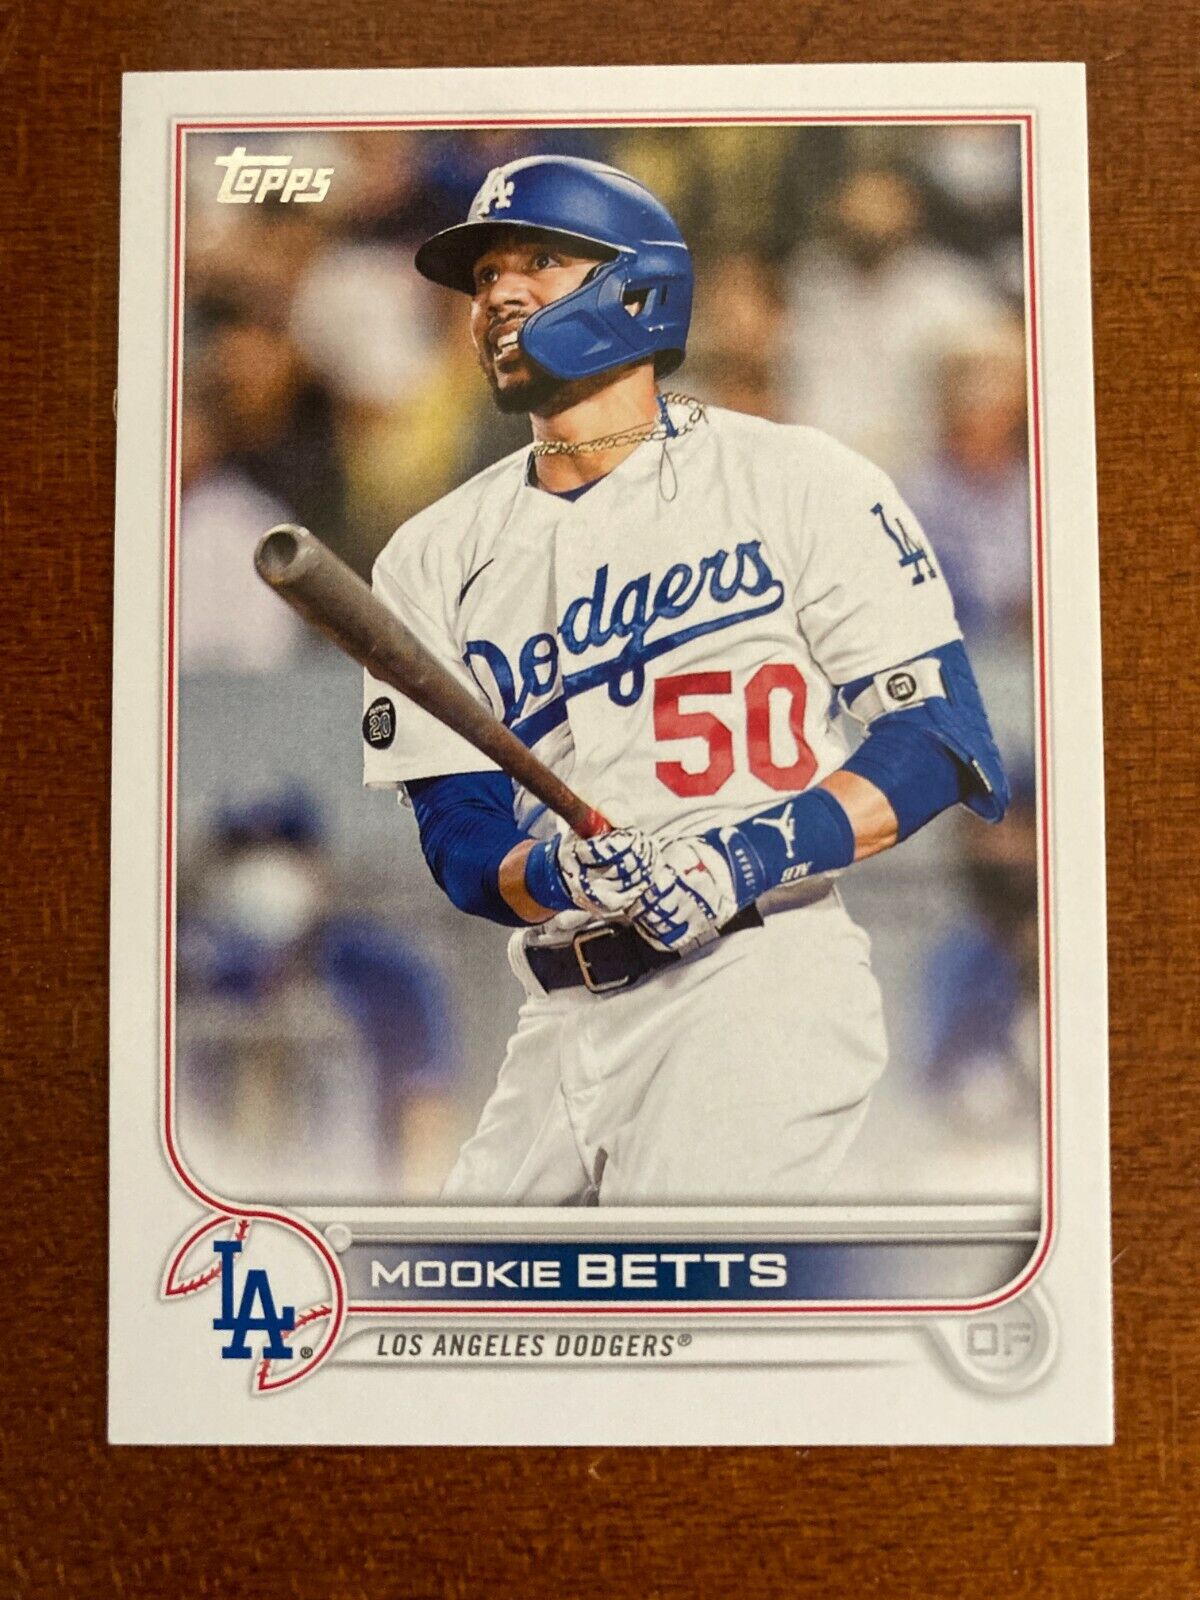 Mookie Betts DODGERS 2022 Topps Series 1 Advanced Stats Parallel Card /300 #50 